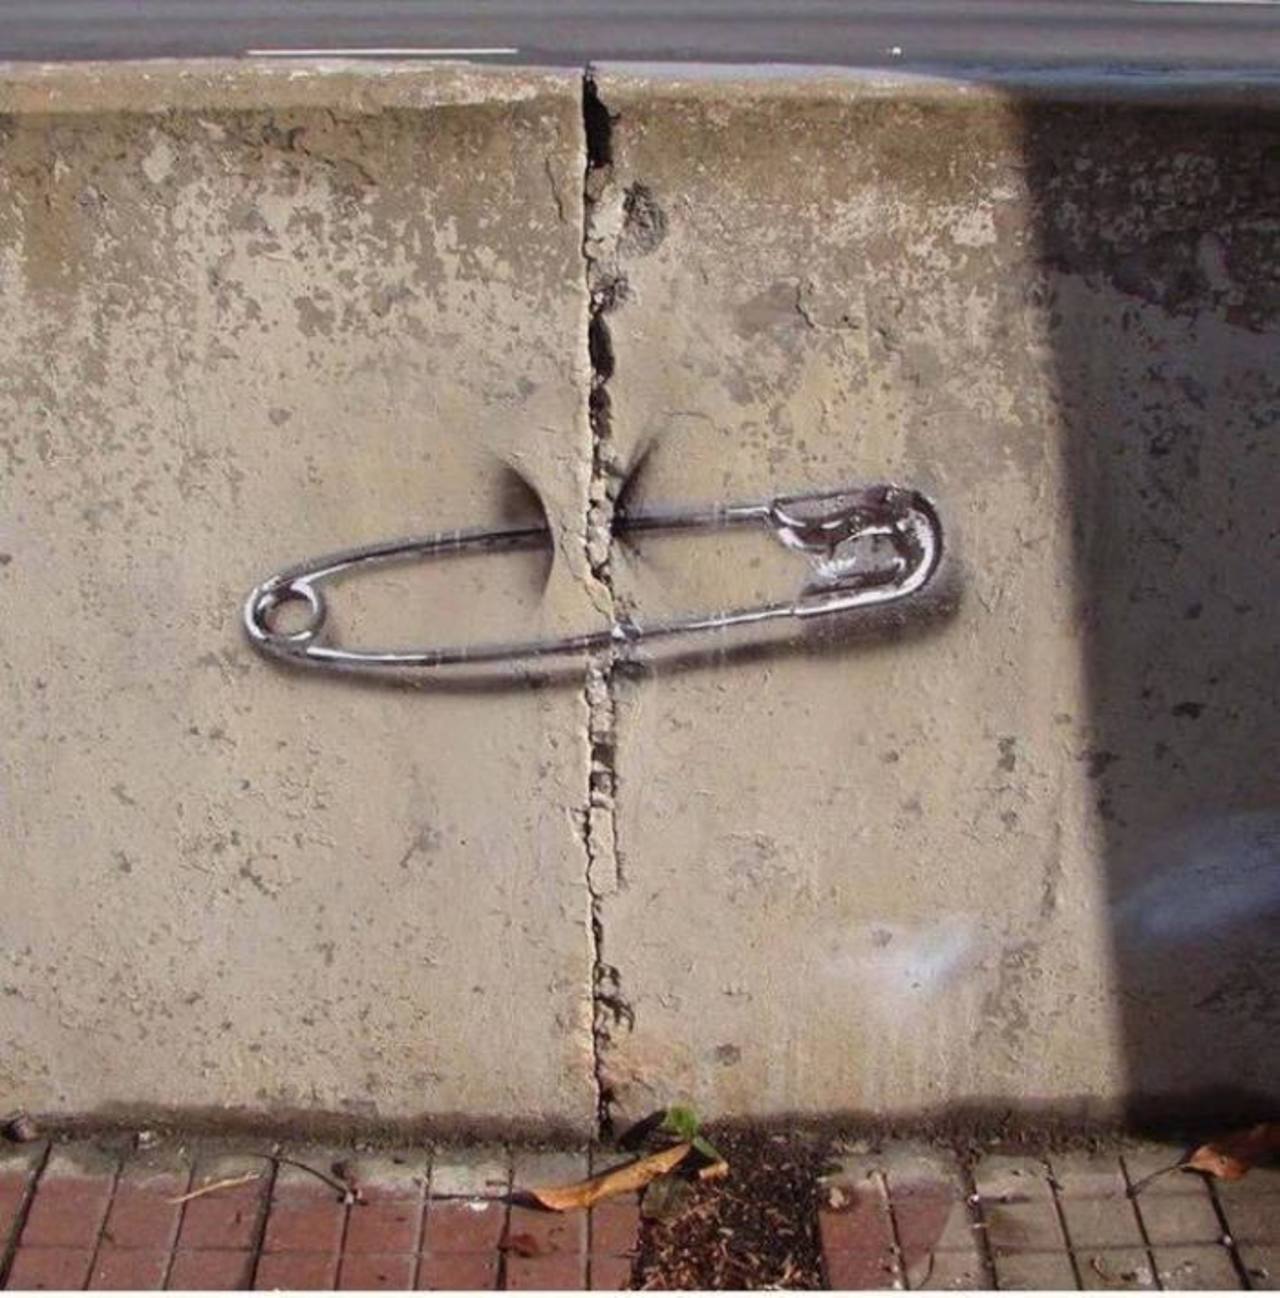 Simple & Beauty – #Creative #Streetart | Be ▲rtist - Be ▲rt https://beartistbeart.com/2016/08/25/simple-beauty-creative-streetart/?utm_campaign=crowdfire&utm_content=crowdfire&utm_medium=social&utm_source=twitter https://t.co/1fCMFh1McZ